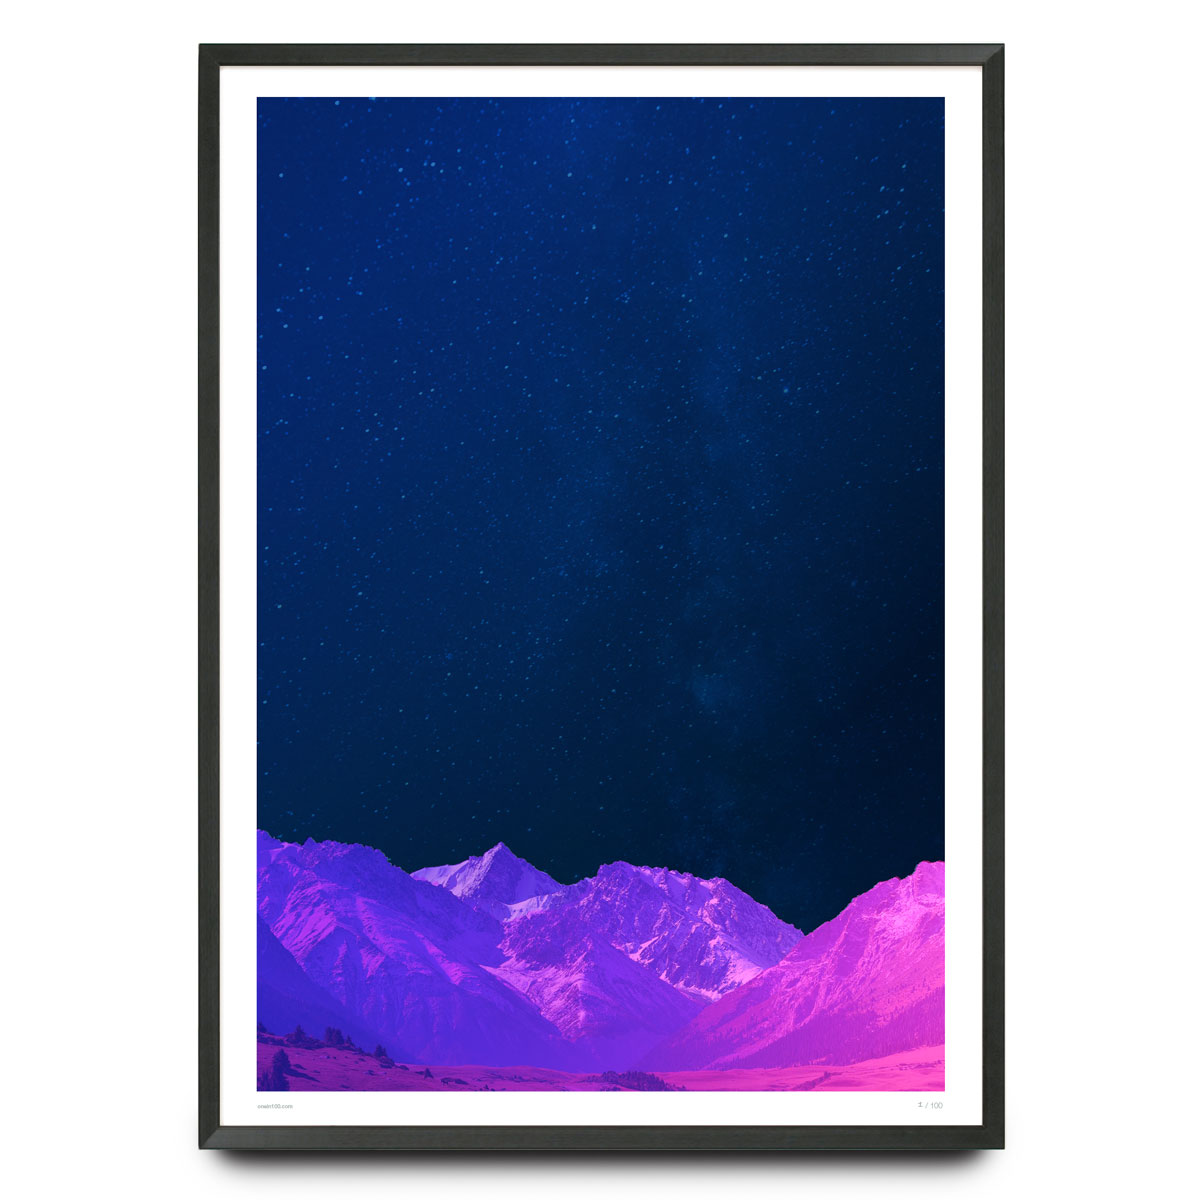 Hyper real mountain sky limited edition poster